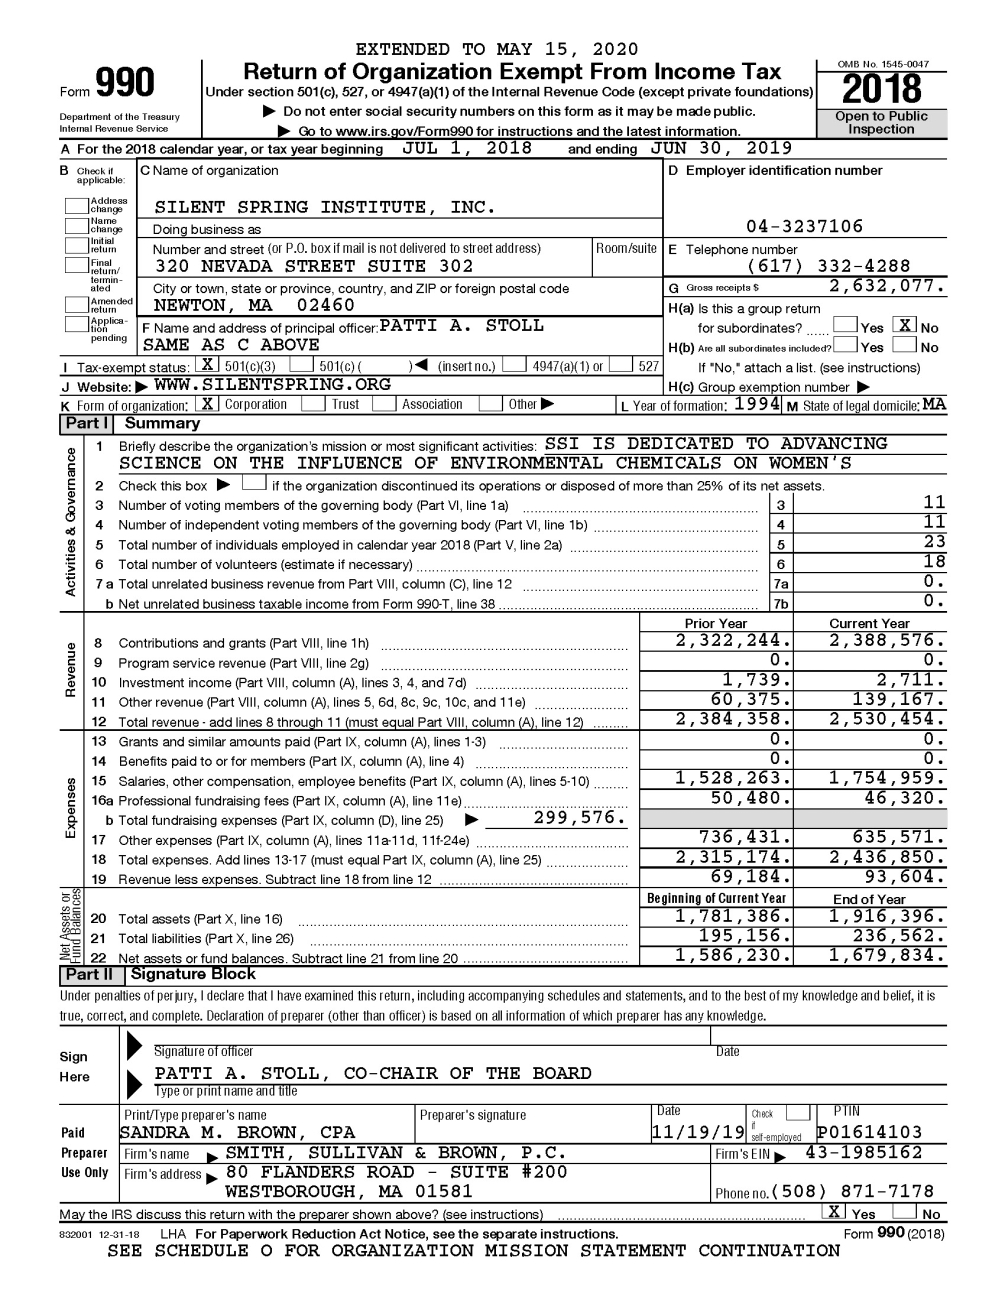 2018 IRS Form 990 (FY19)